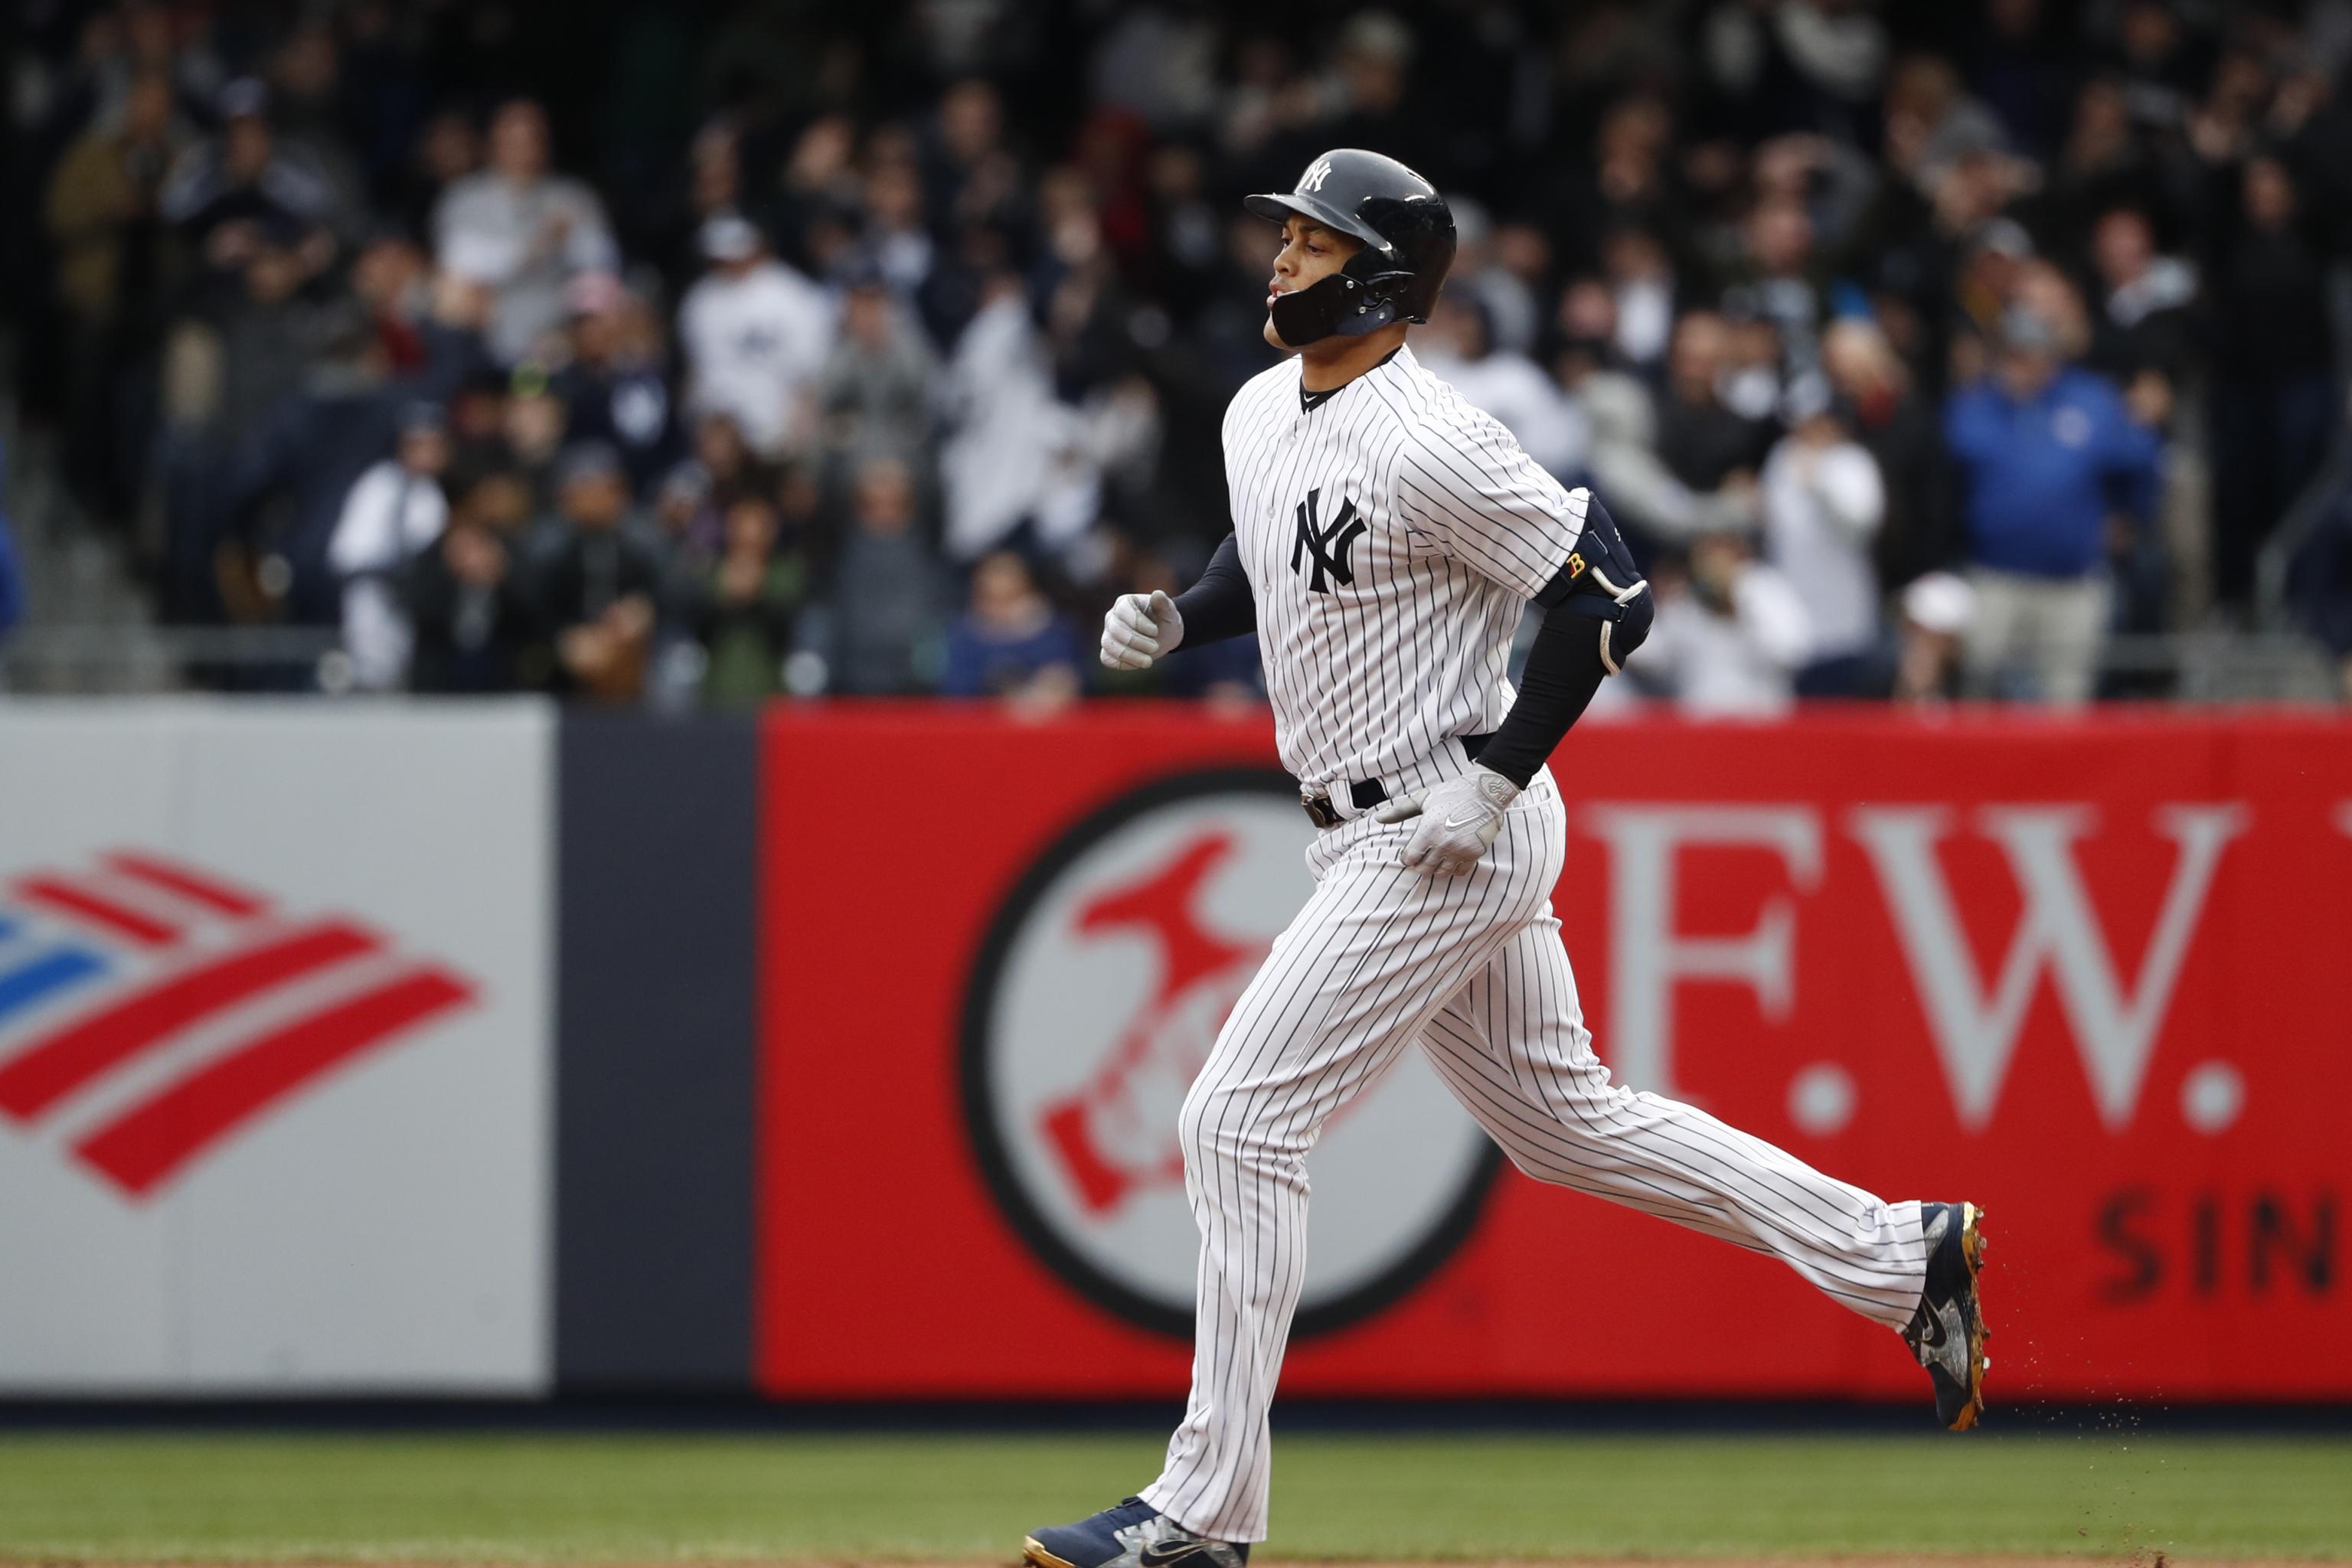 Giancarlo Stanton's First Season In The Bronx: High Expectations